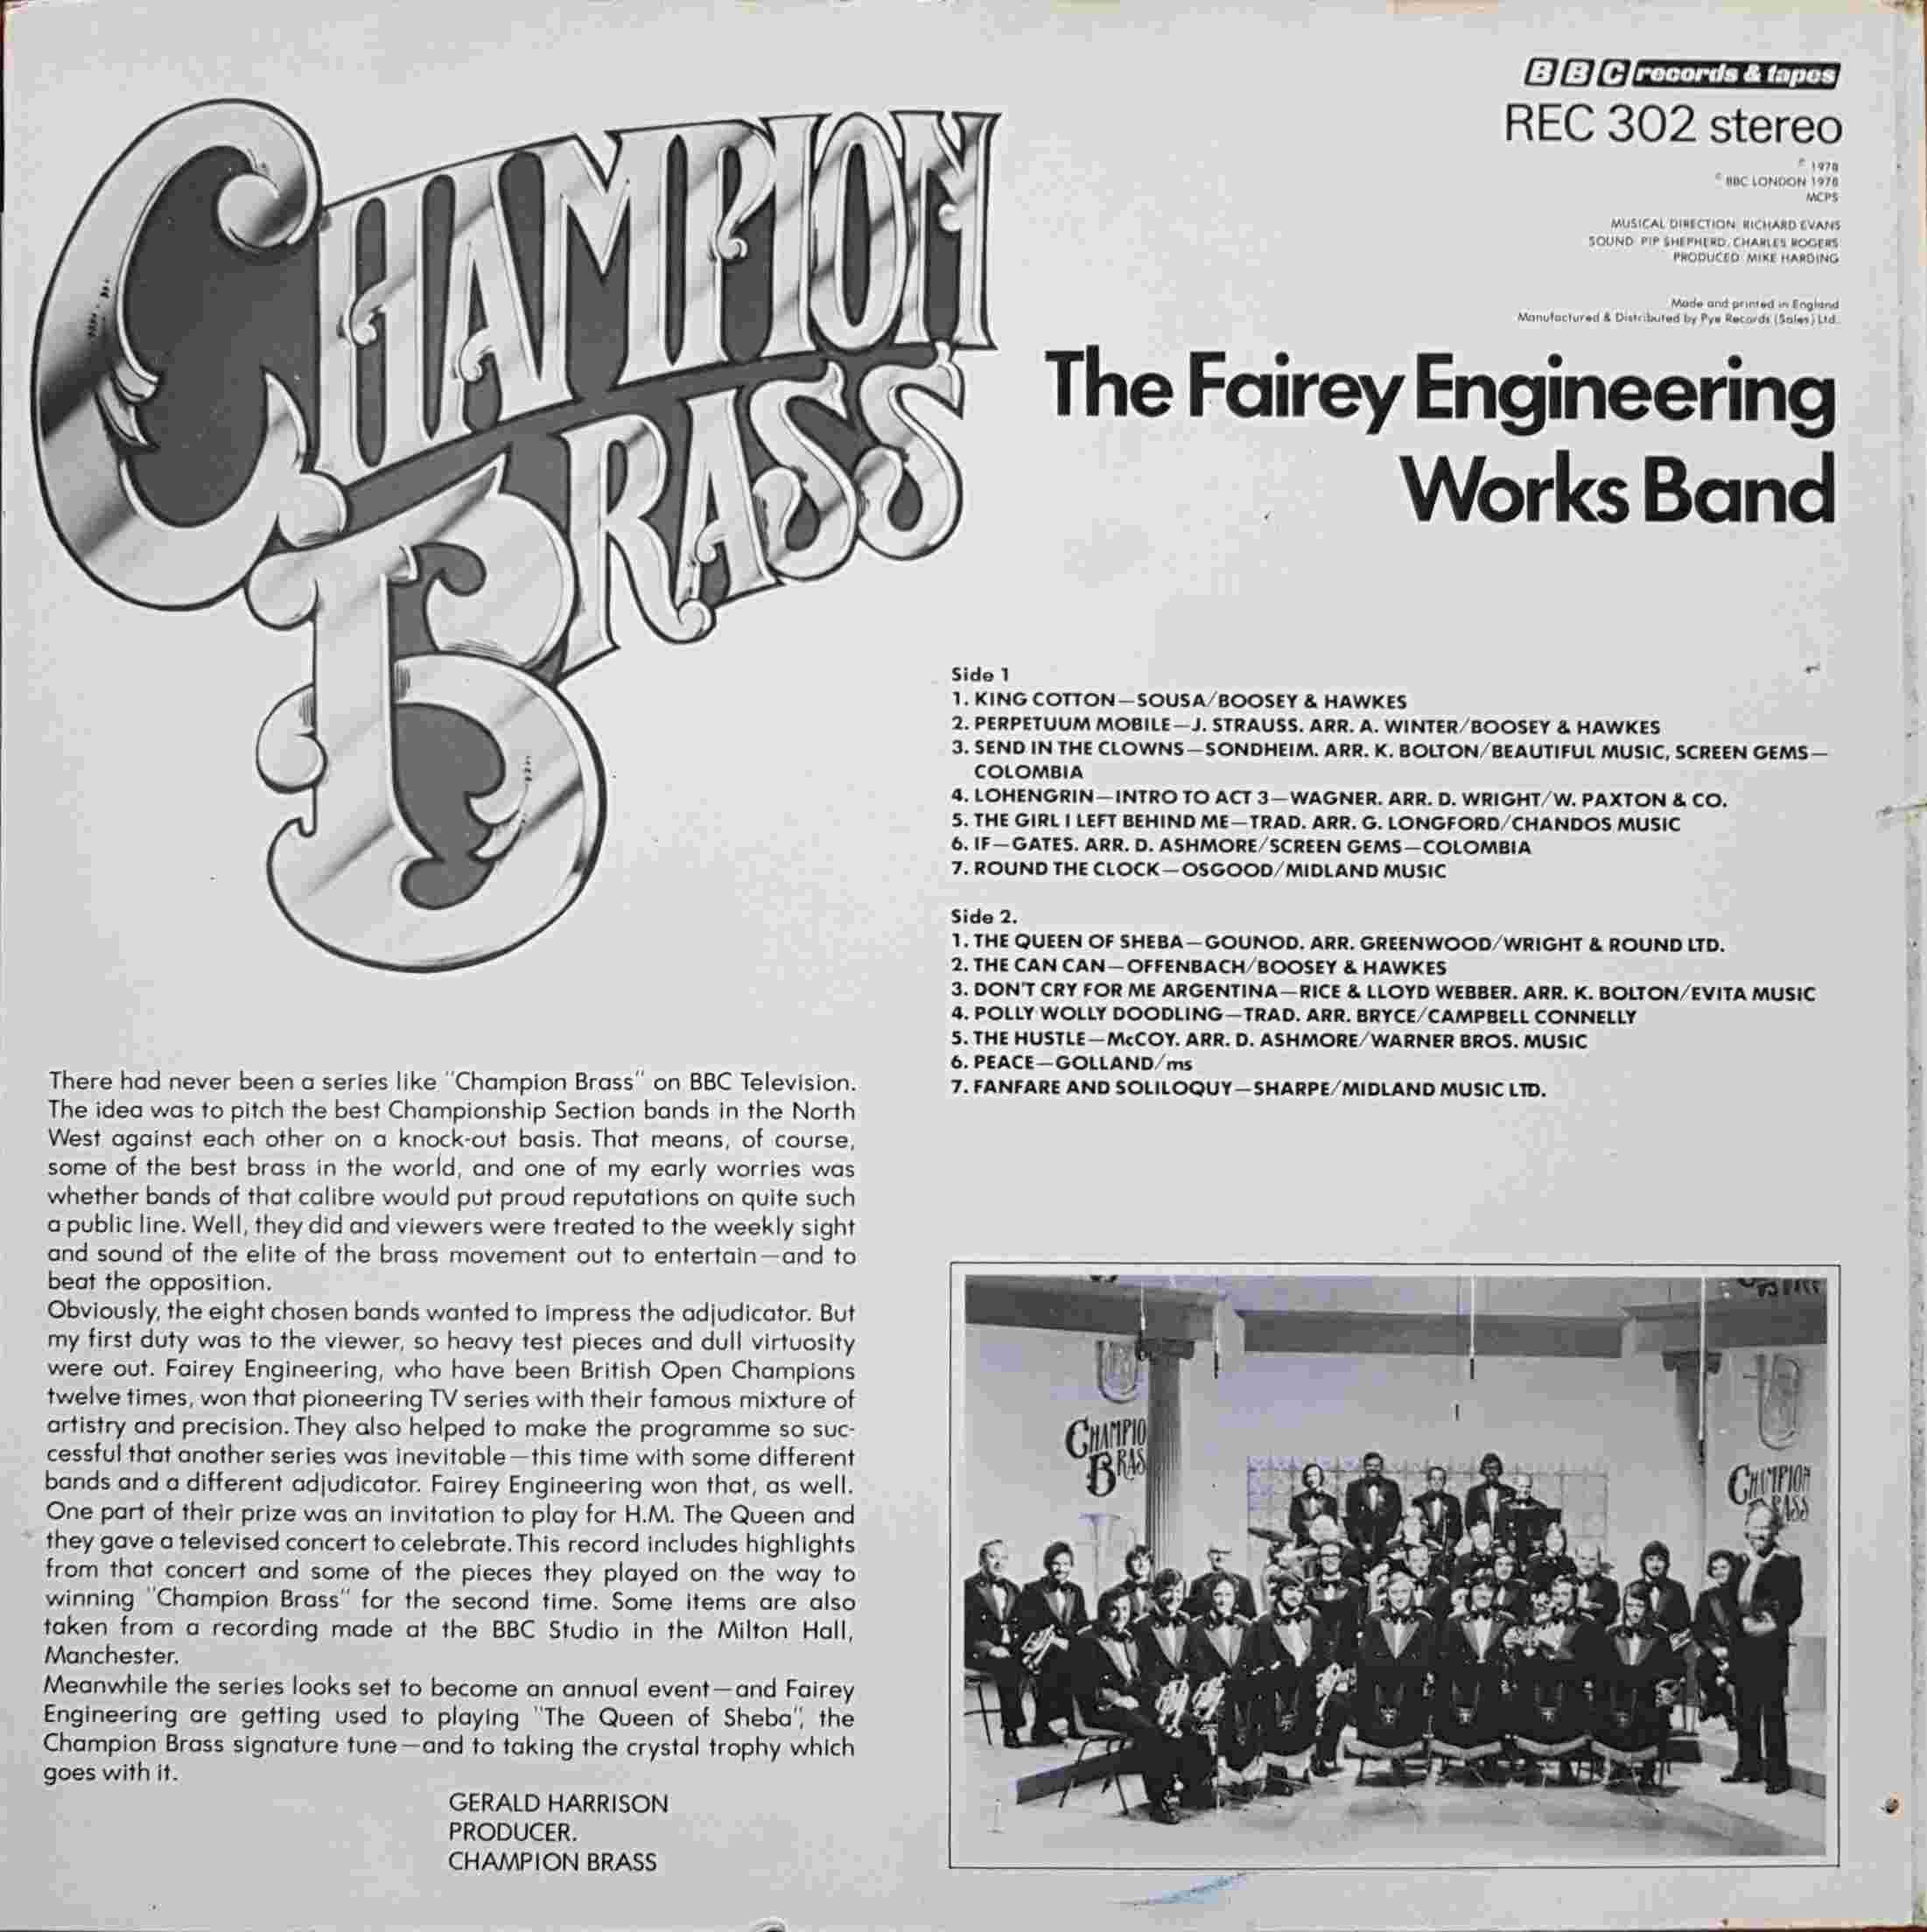 Picture of REC 302 The Fairey Engineering Works band - Champion brass by artist Various from the BBC records and Tapes library